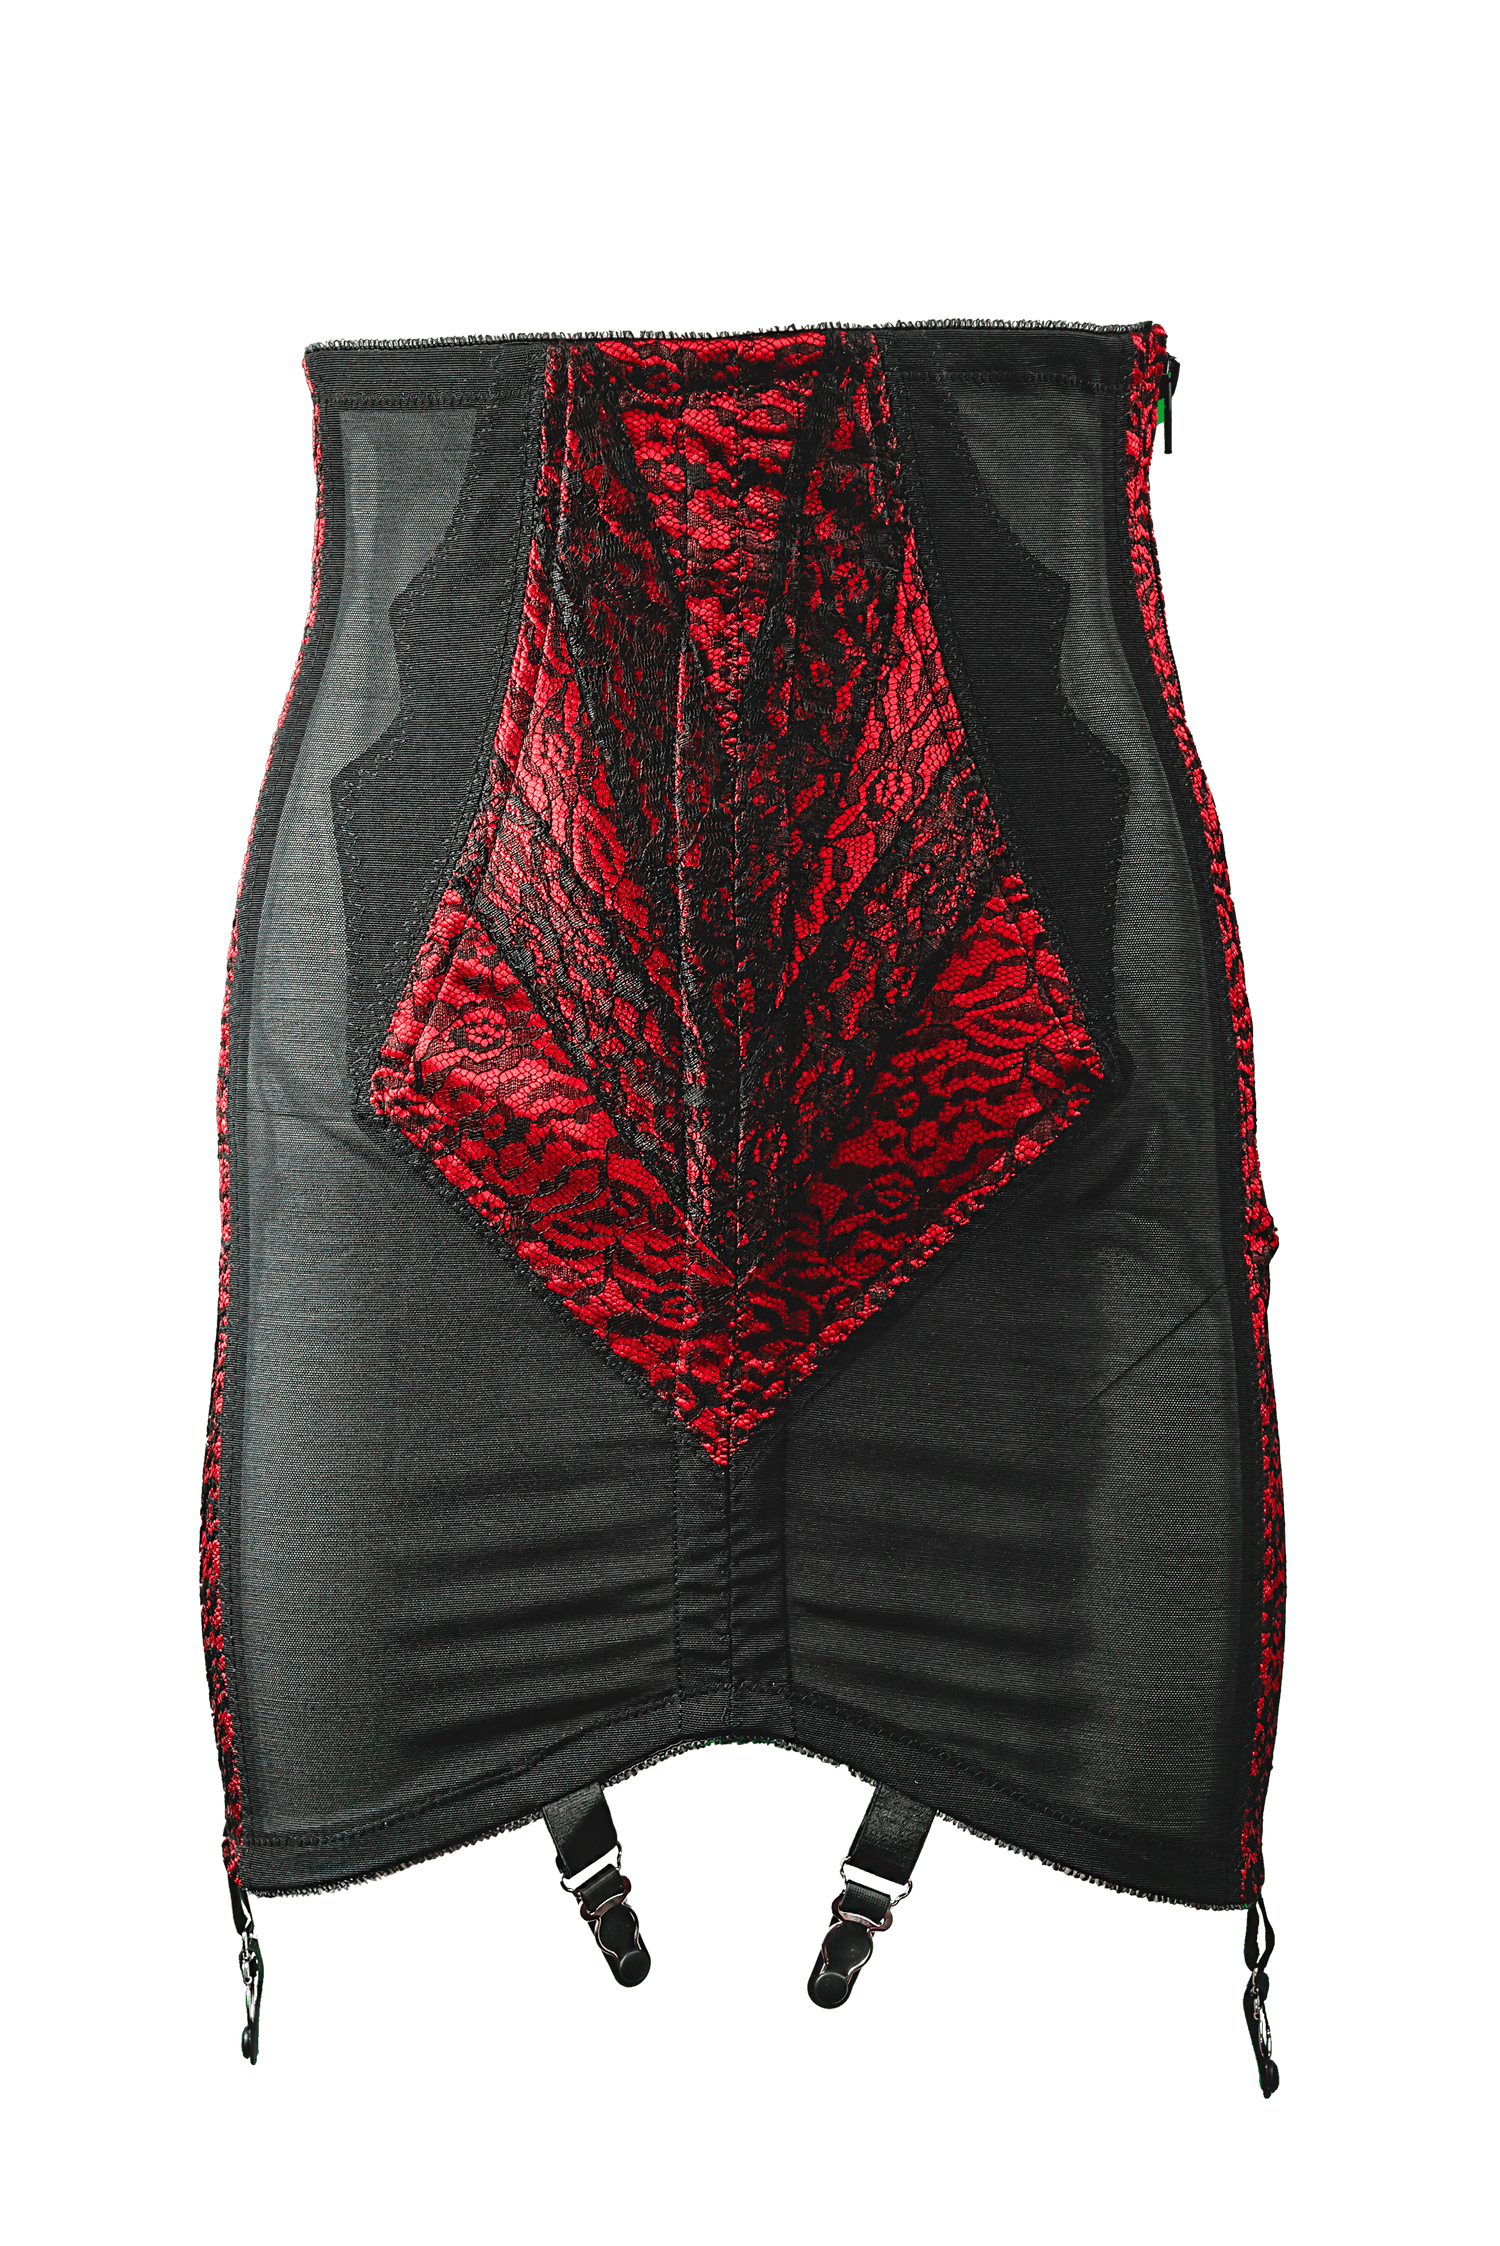 Retro Open Bottom Girdle with Side Zip in Black Power Mesh, Satin & Lace 